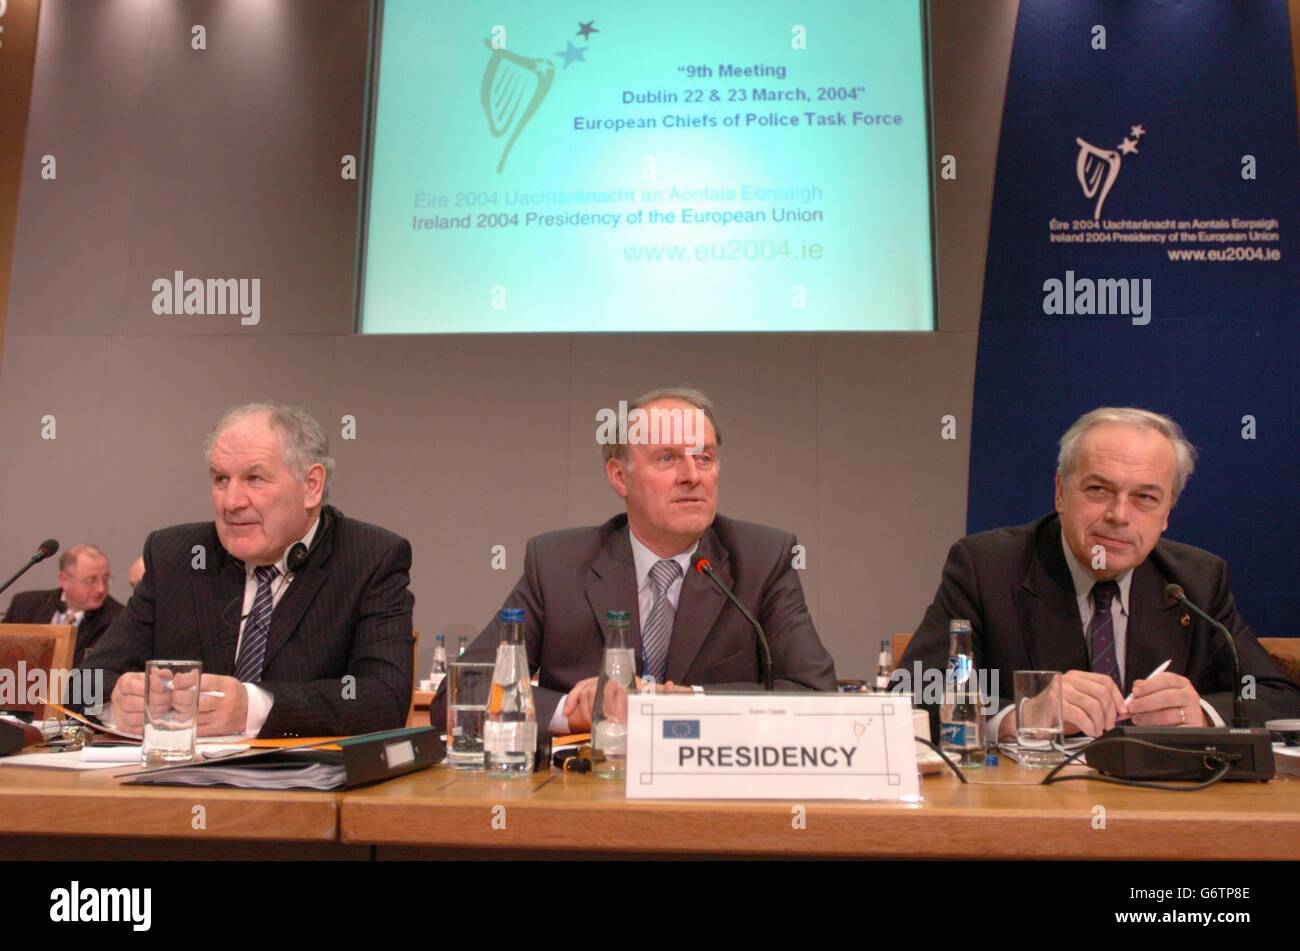 (L-R) Joe Egan, Assisant Garda Commissioner, Garda Commissioner, Noel Conroy and Charles Elsen Director of the Council Secretariat, at the European Chiefs of Police Task Force Meeting at Dublin Castle. The Dublin Castle summit marked the ninth meeting of the European Chiefs of Police Task Force the Olympic Games in Athens and the European Football Championships in Portugal would be discussed. Stock Photo